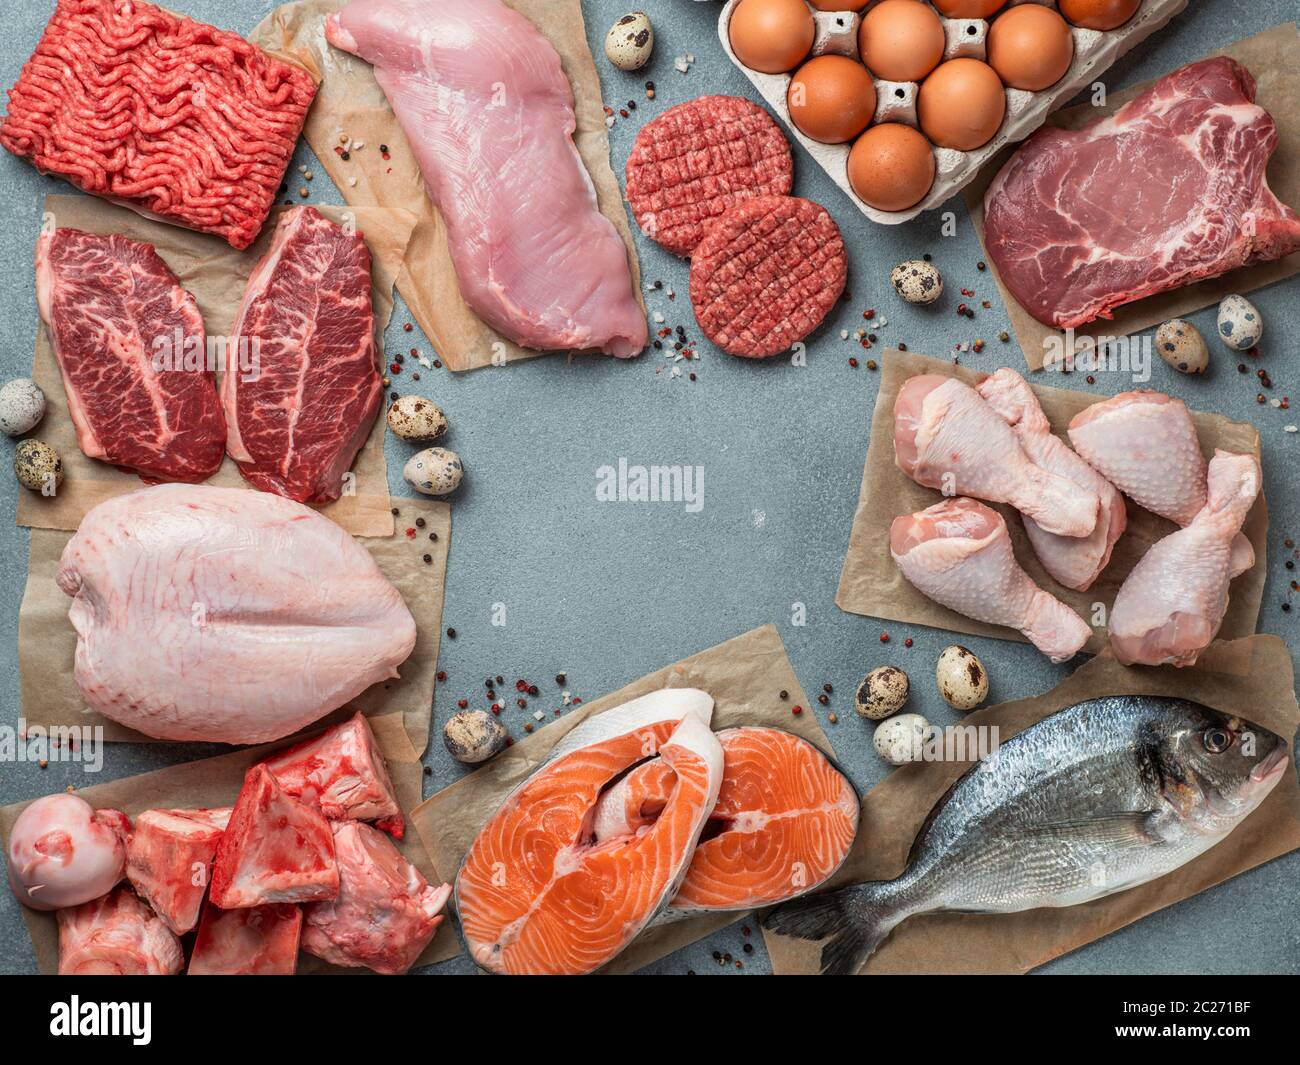 Carnivore diet concept. Raw ingredients for zero carb diet - meat, poultry, fish, seafood, eggs, beef bones for bone broth and copy space in center on Stock Photo